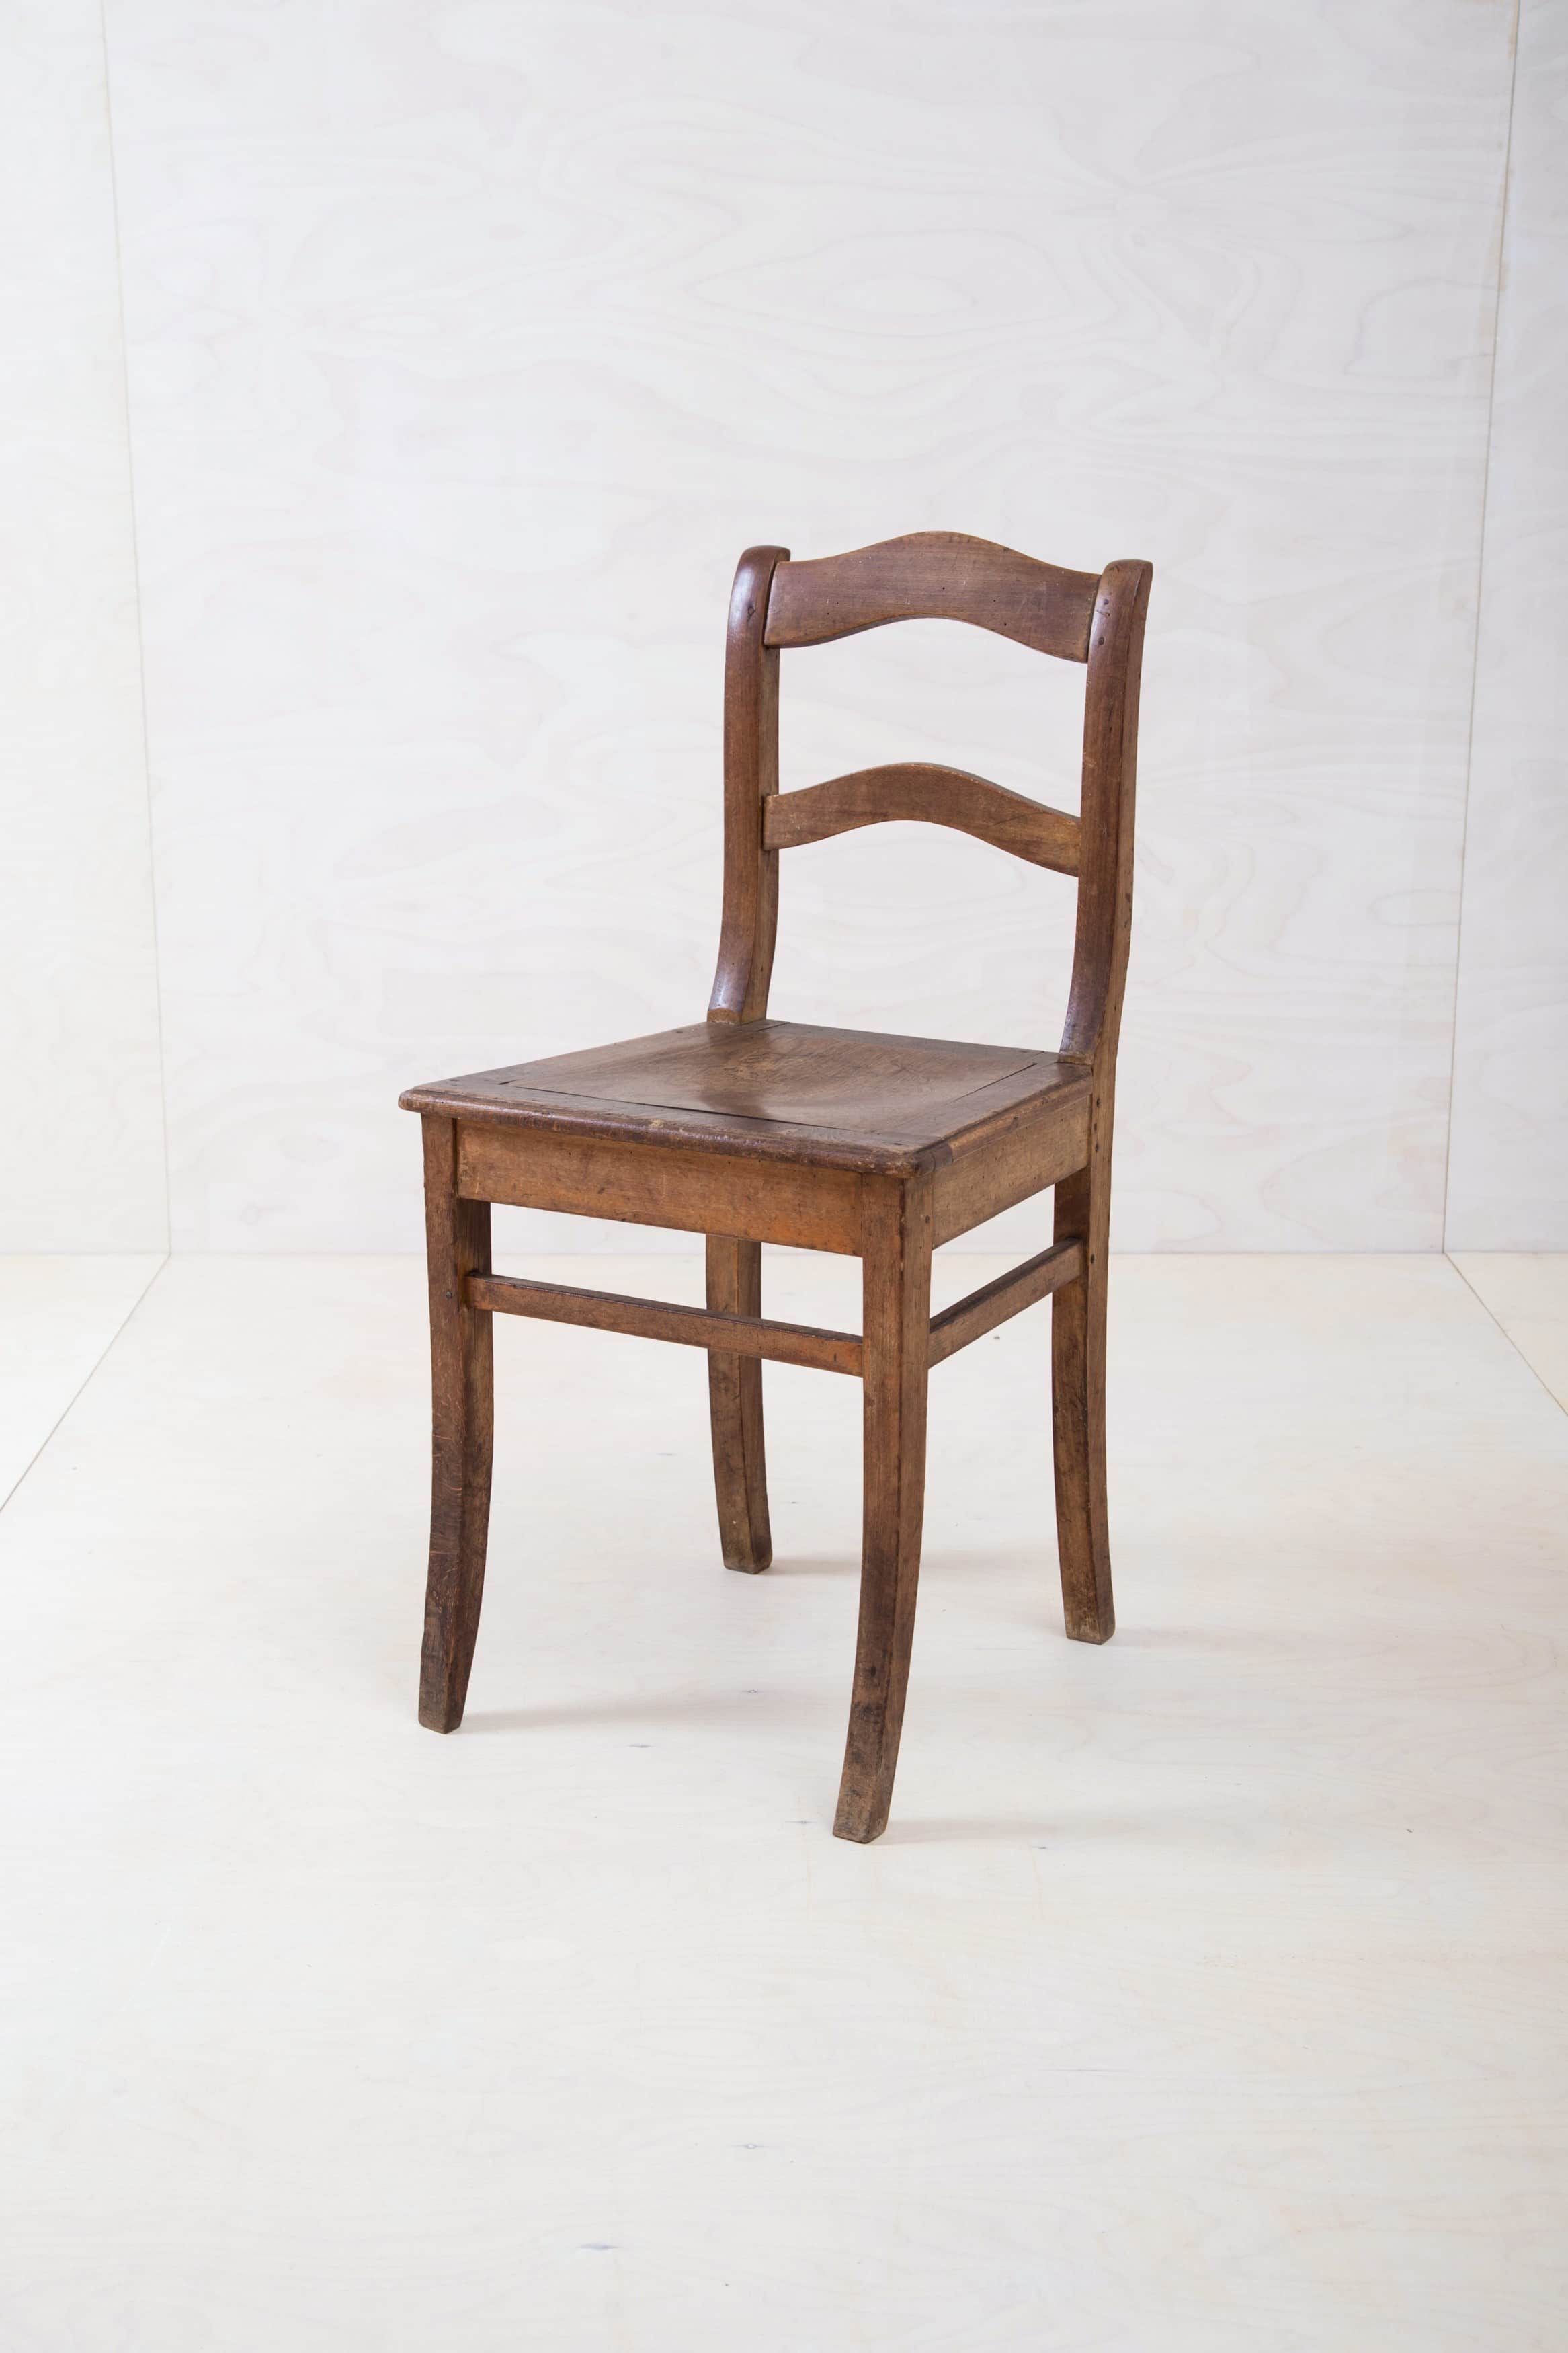 Vintage pub chairs for rent, rental furniture & event supplies